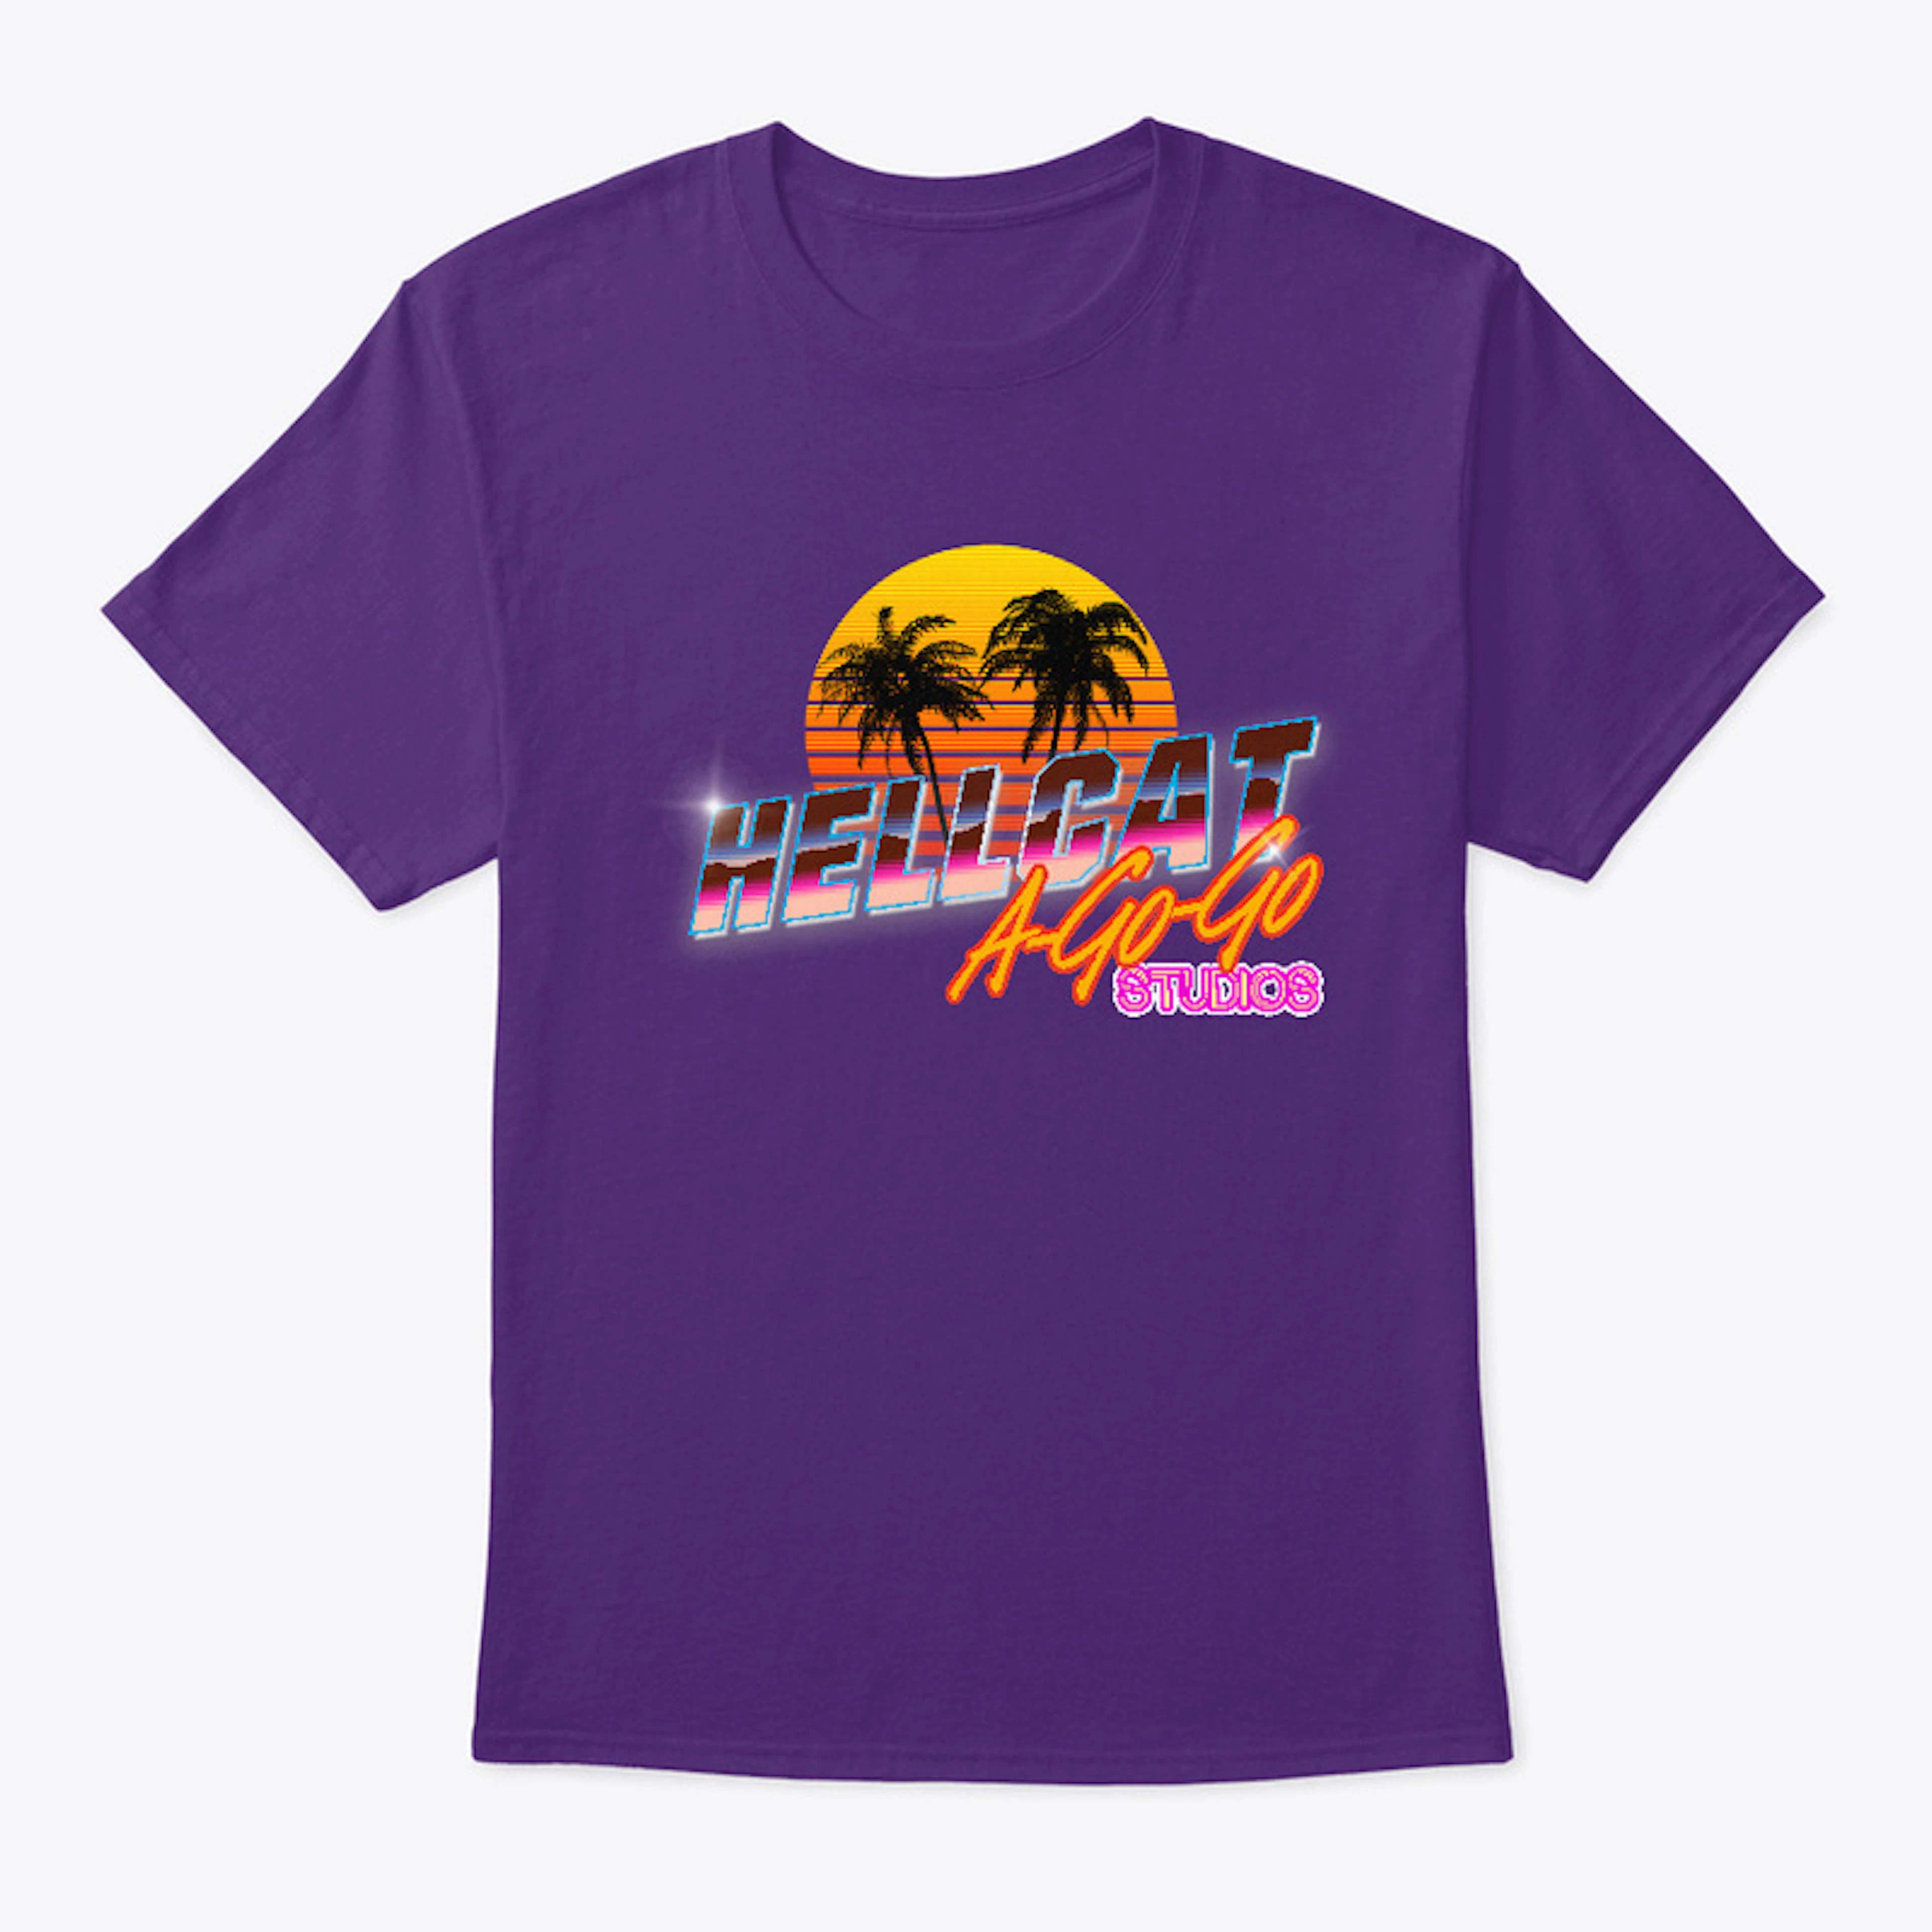 Hellct A-Go-Go 80s T-shirt in mens